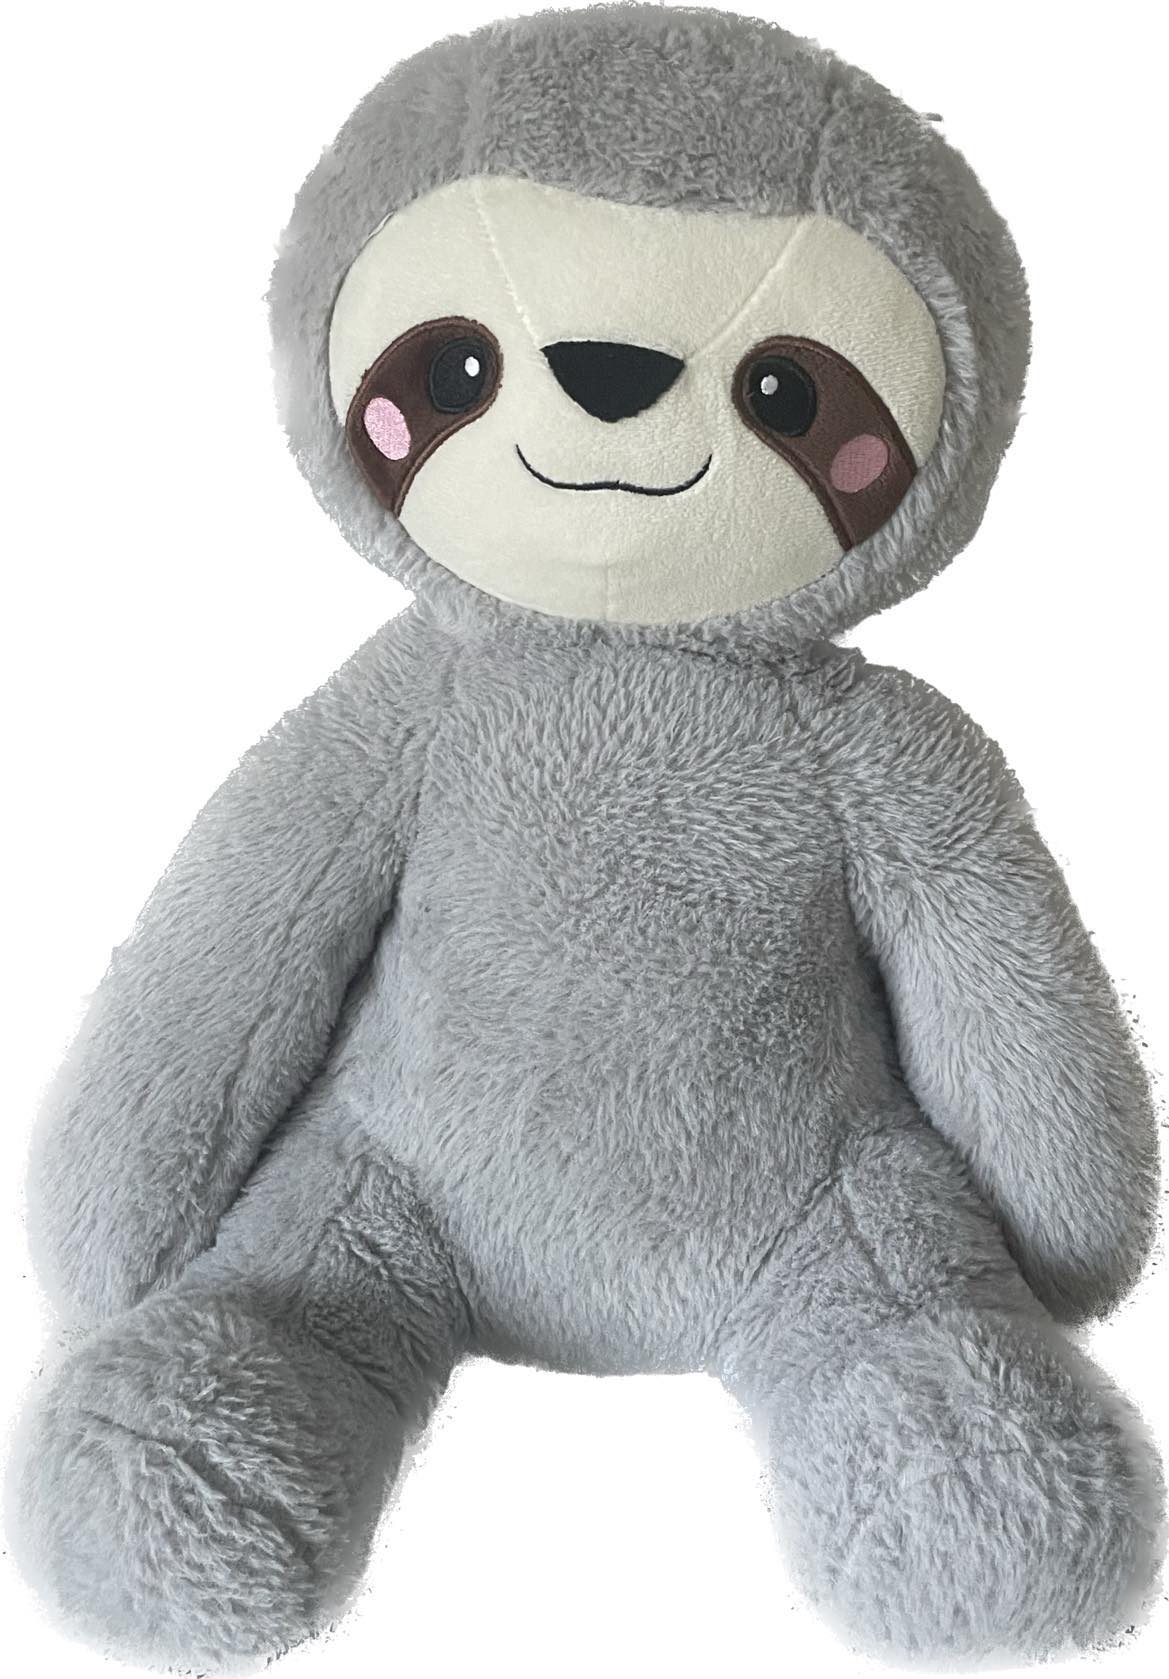 Weighted Stuffed Animal for Adults